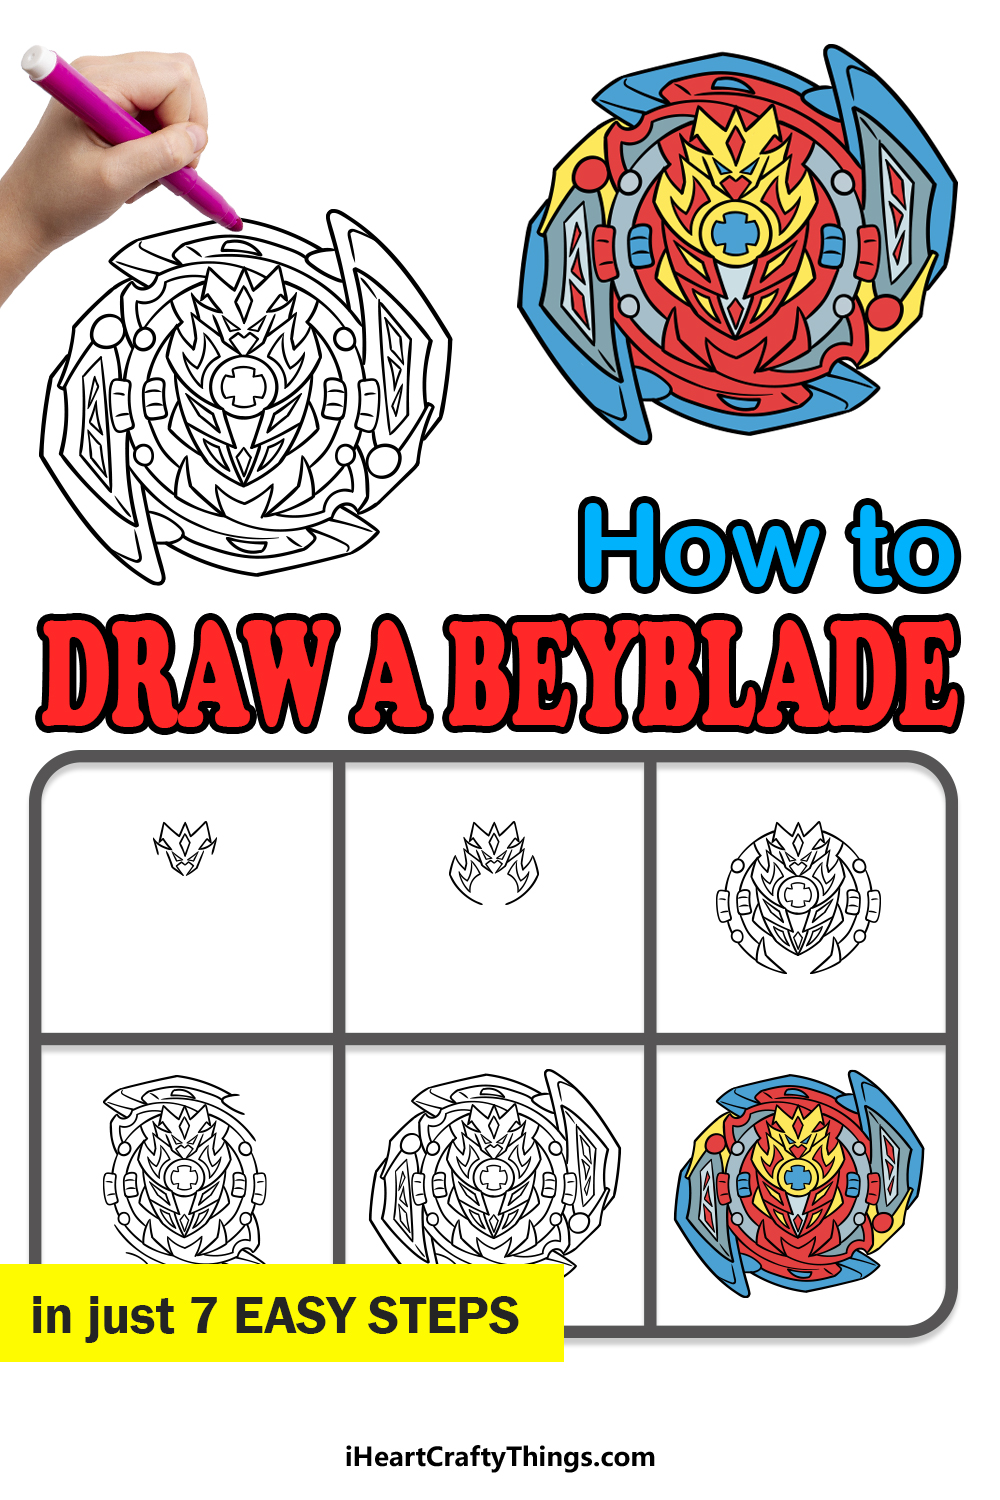 how to draw a Beyblade in 7 easy steps